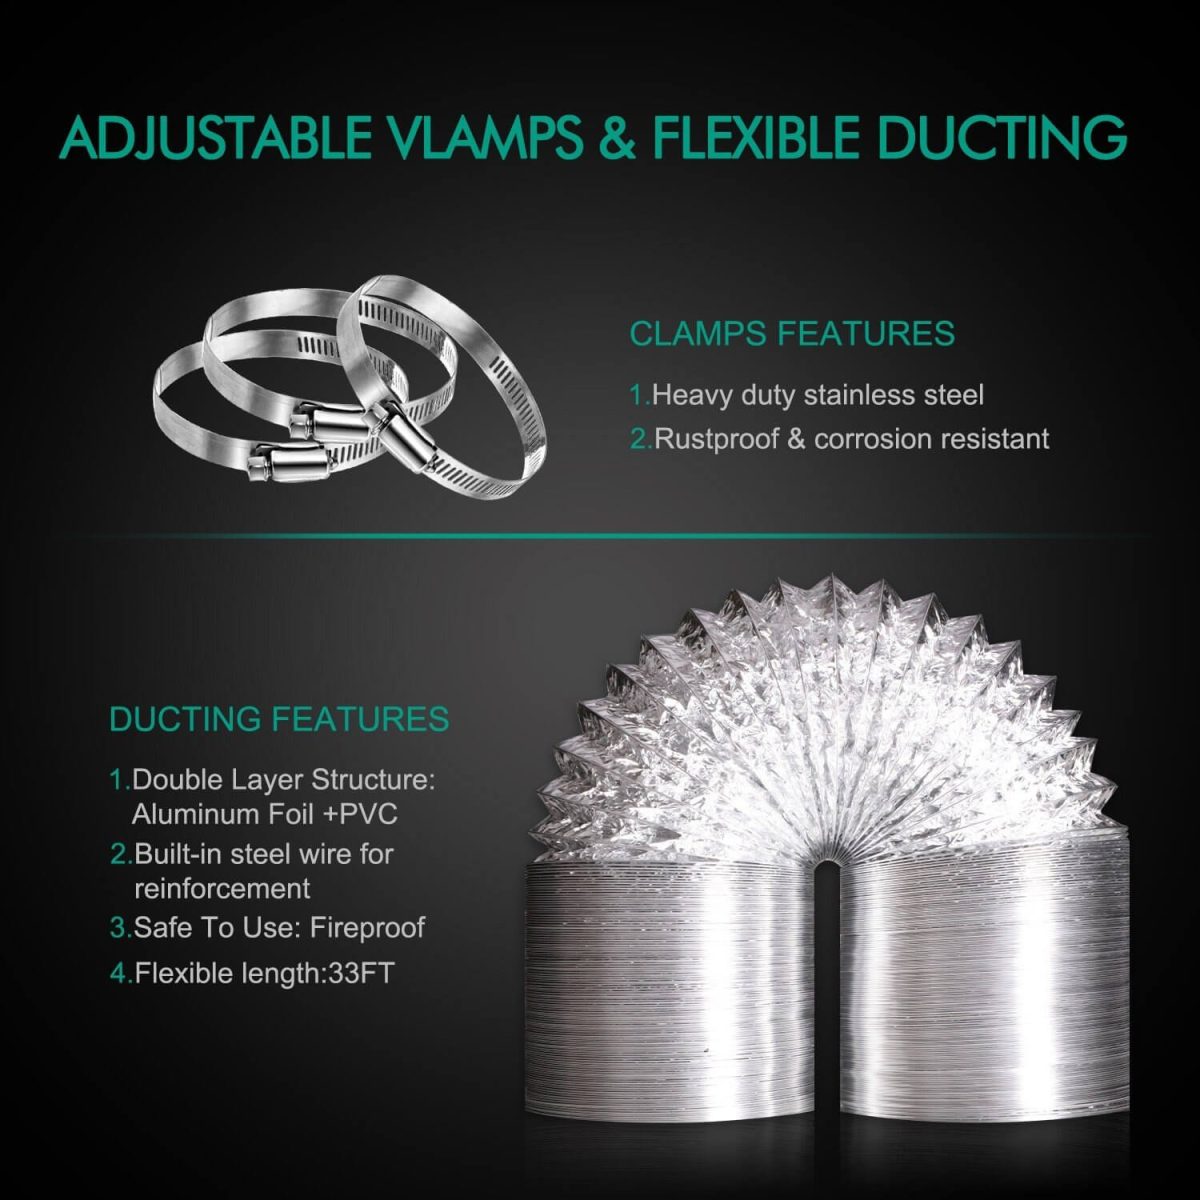 Adjustable vlamps & flecible ducting, double layer structure ducting, safe to use